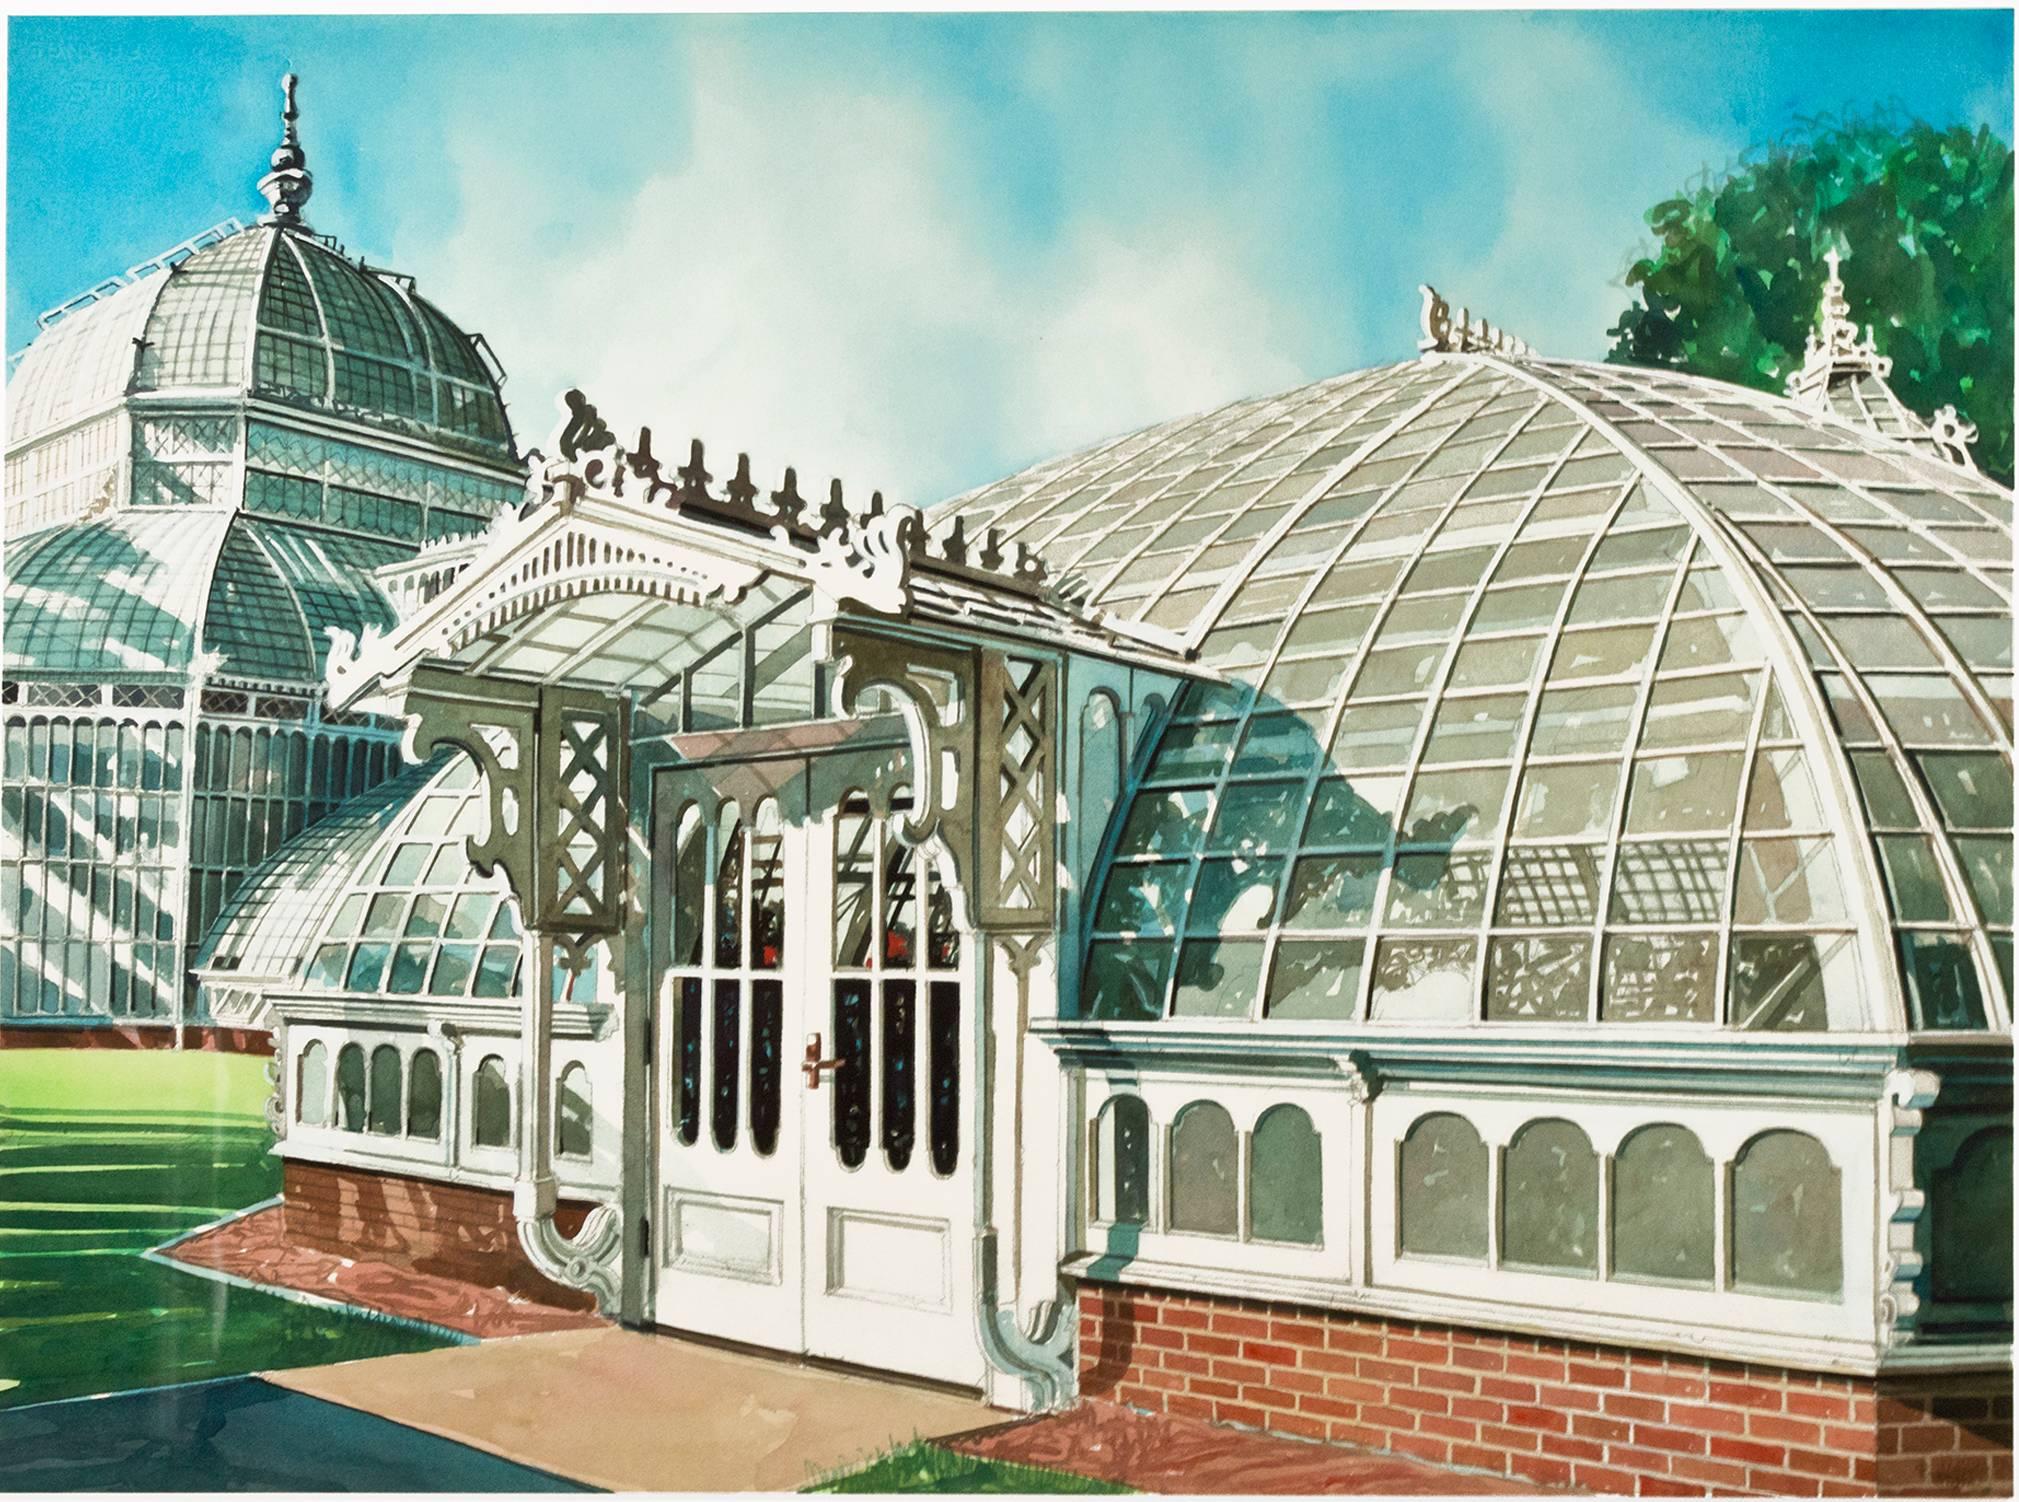 "Golden Gate Park" is an original signed watercolor by Bruce McCombs. It depicts the architecture of two buildings in a park, both feature many repeating windows. This painting displays McCombs' exquisite attention to light, reflection, and detail.